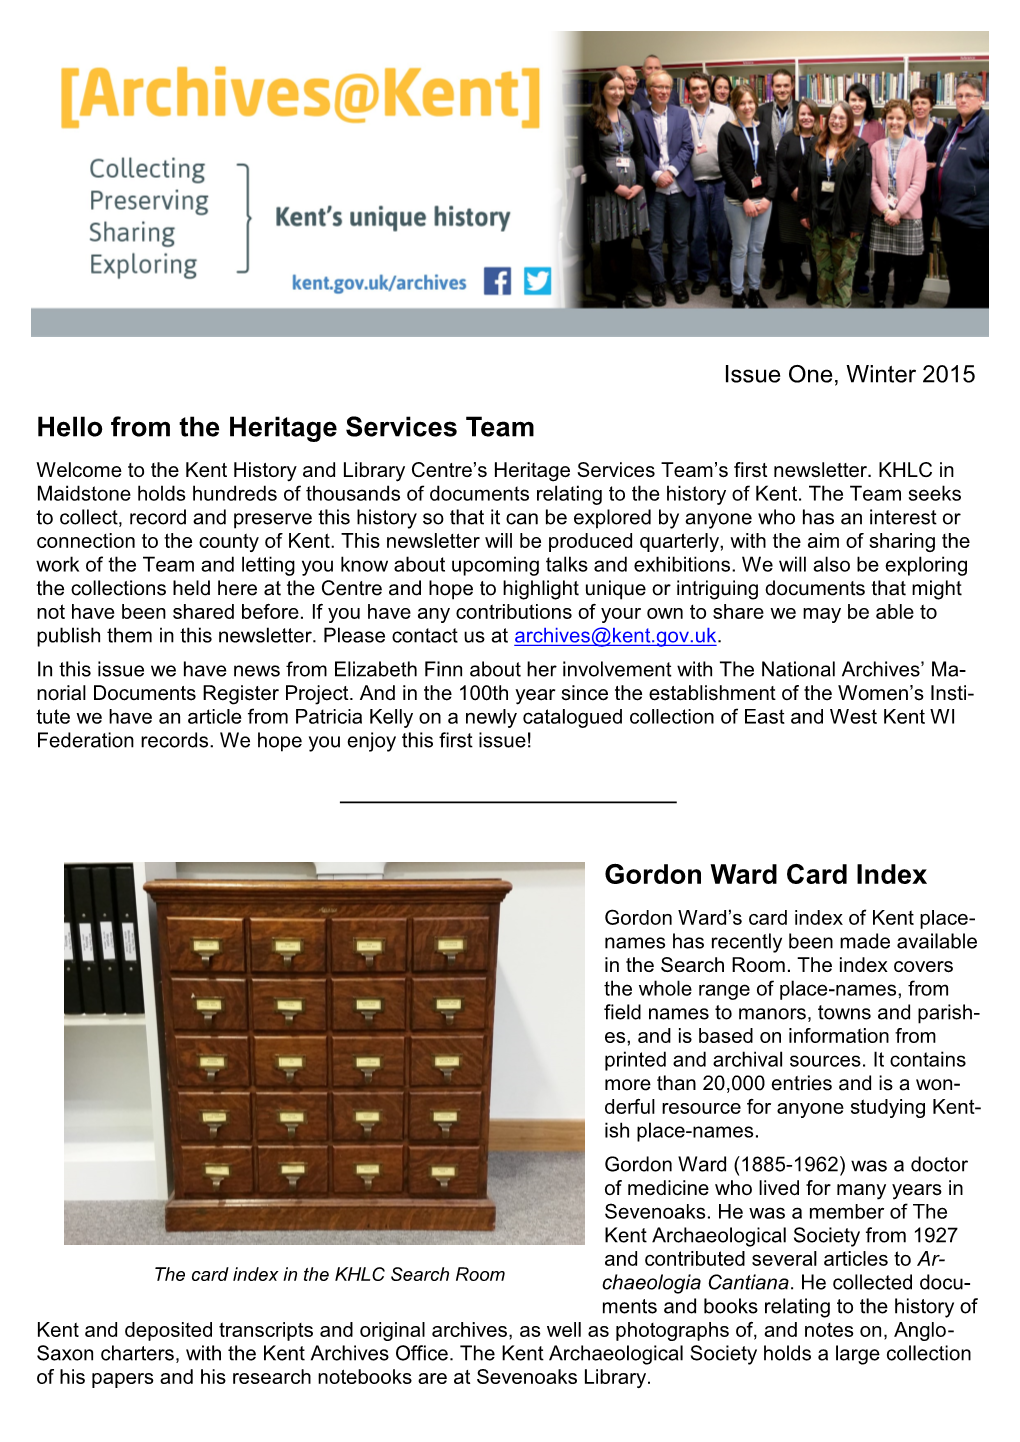 Hello from the Heritage Services Team Gordon Ward Card Index